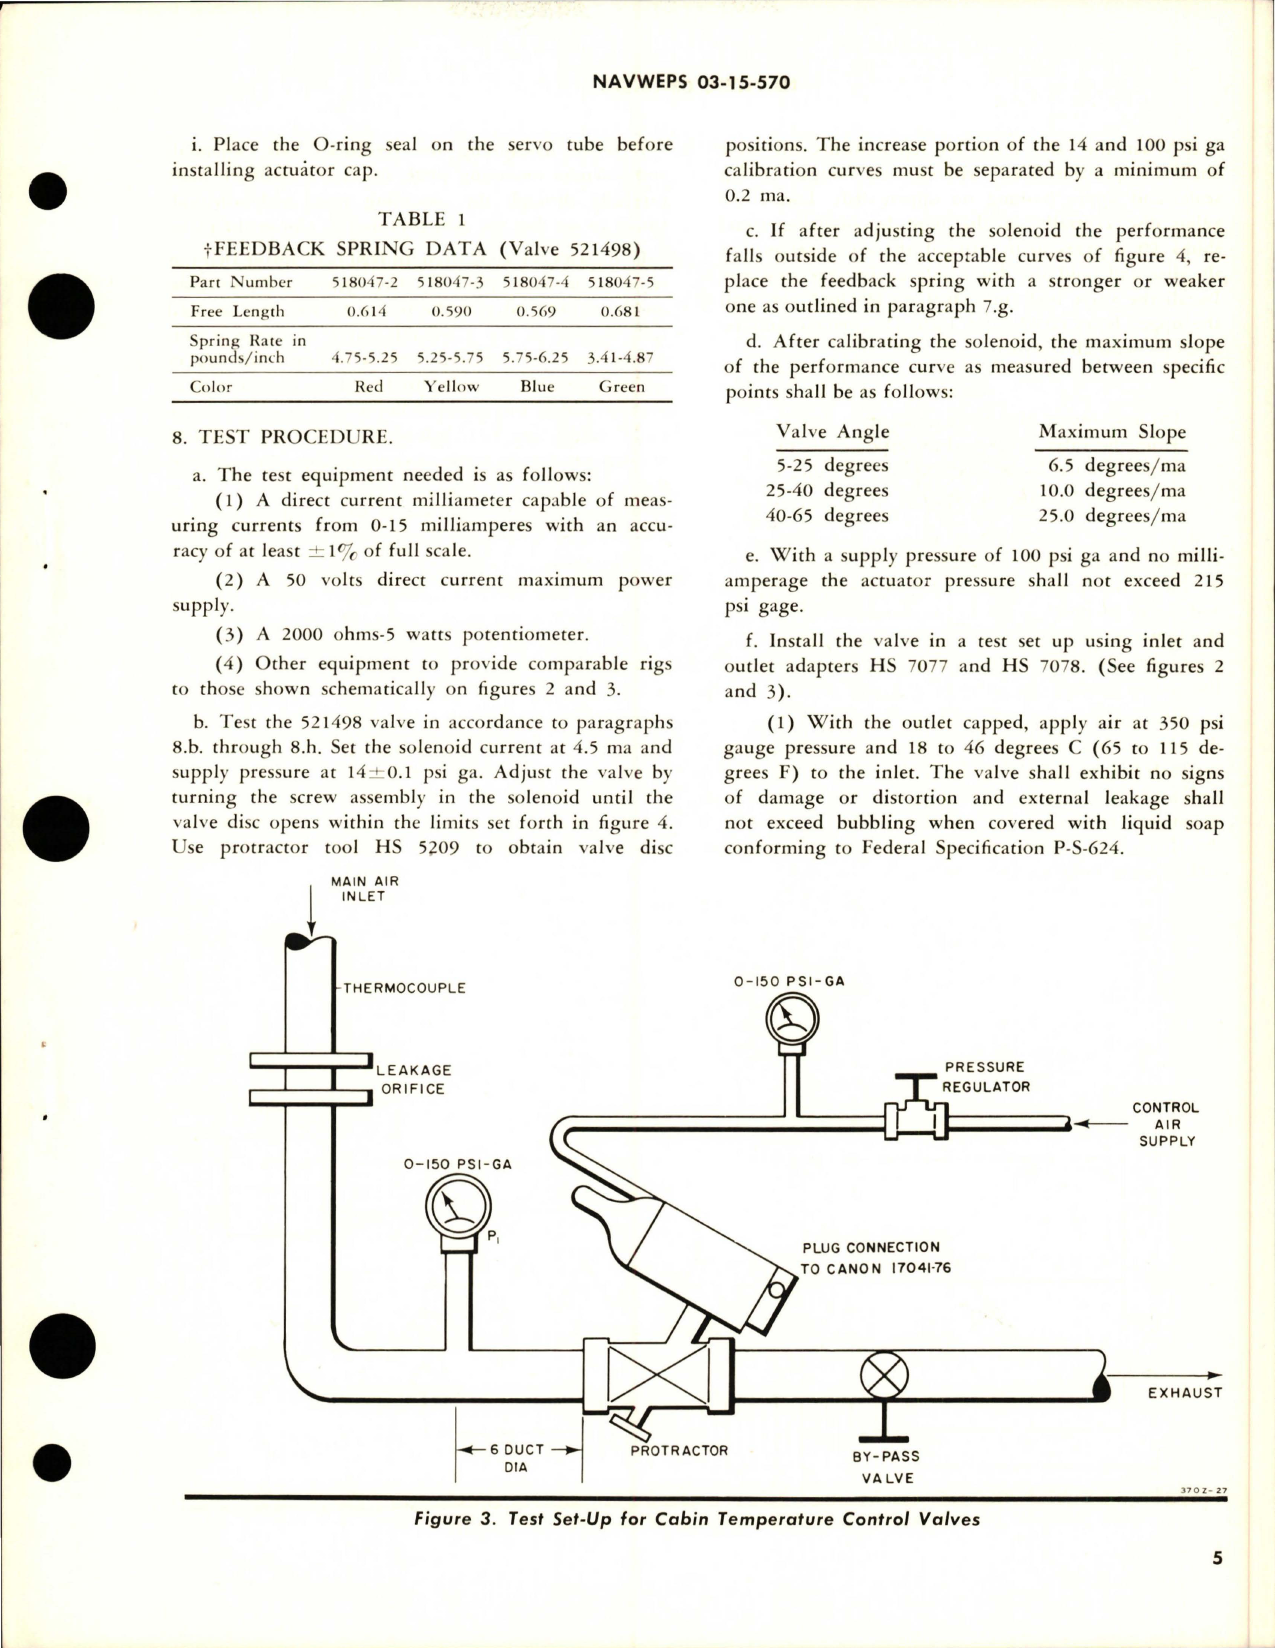 Sample page 5 from AirCorps Library document: Overhaul Instructions with Parts for Cabin Temperature Control Valves - Assembly 96121 and 521498